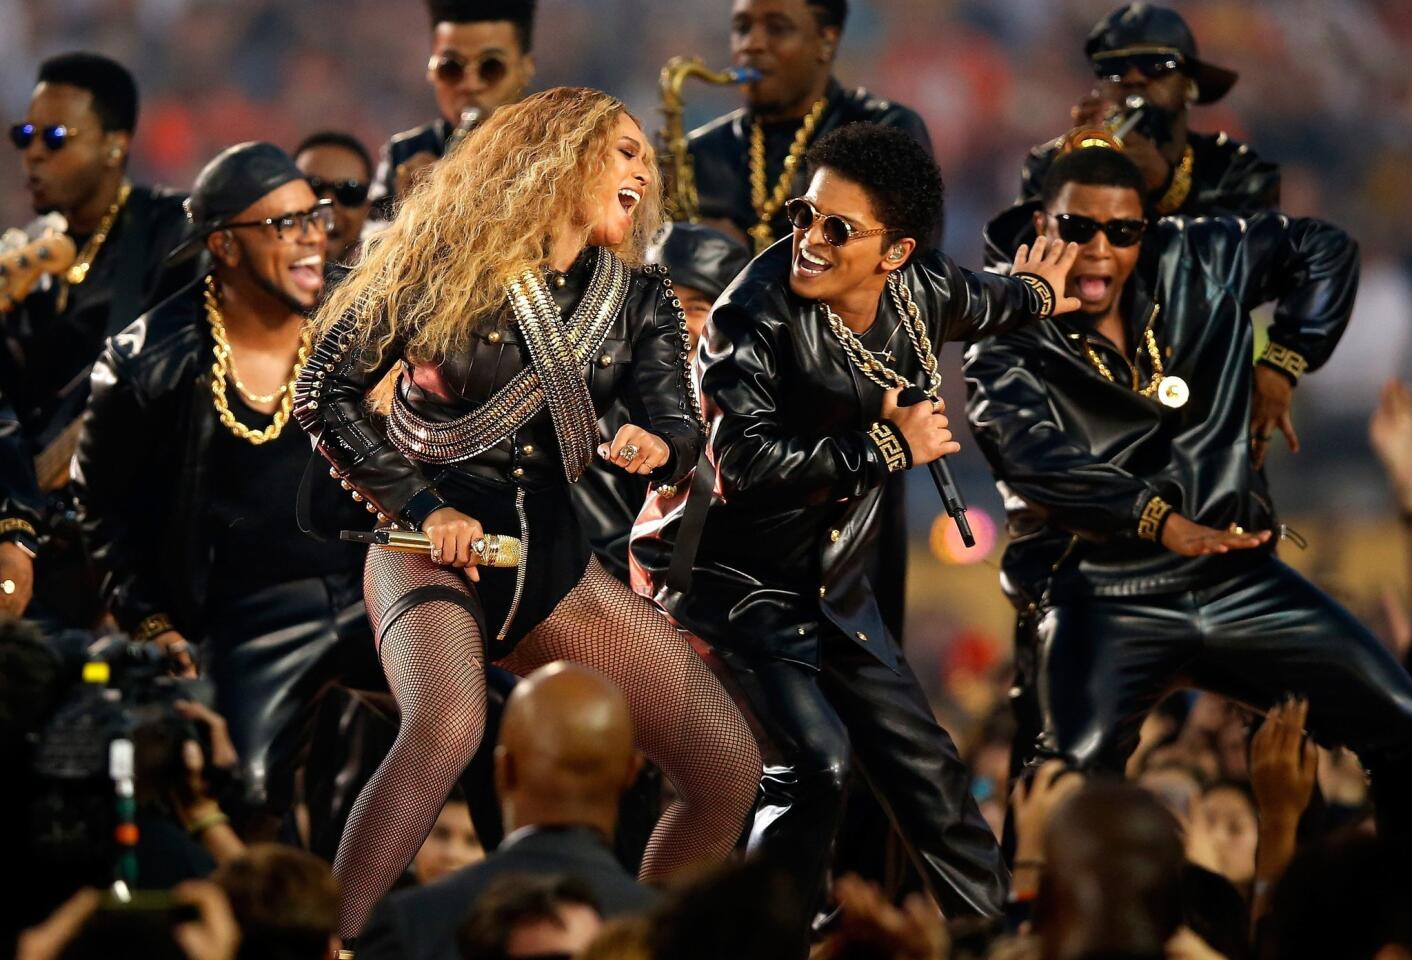 Beyonce and Bruno Mars perform during the Pepsi Super Bowl 50 Halftime Show. Photo by Ezra Shaw/Getty Images